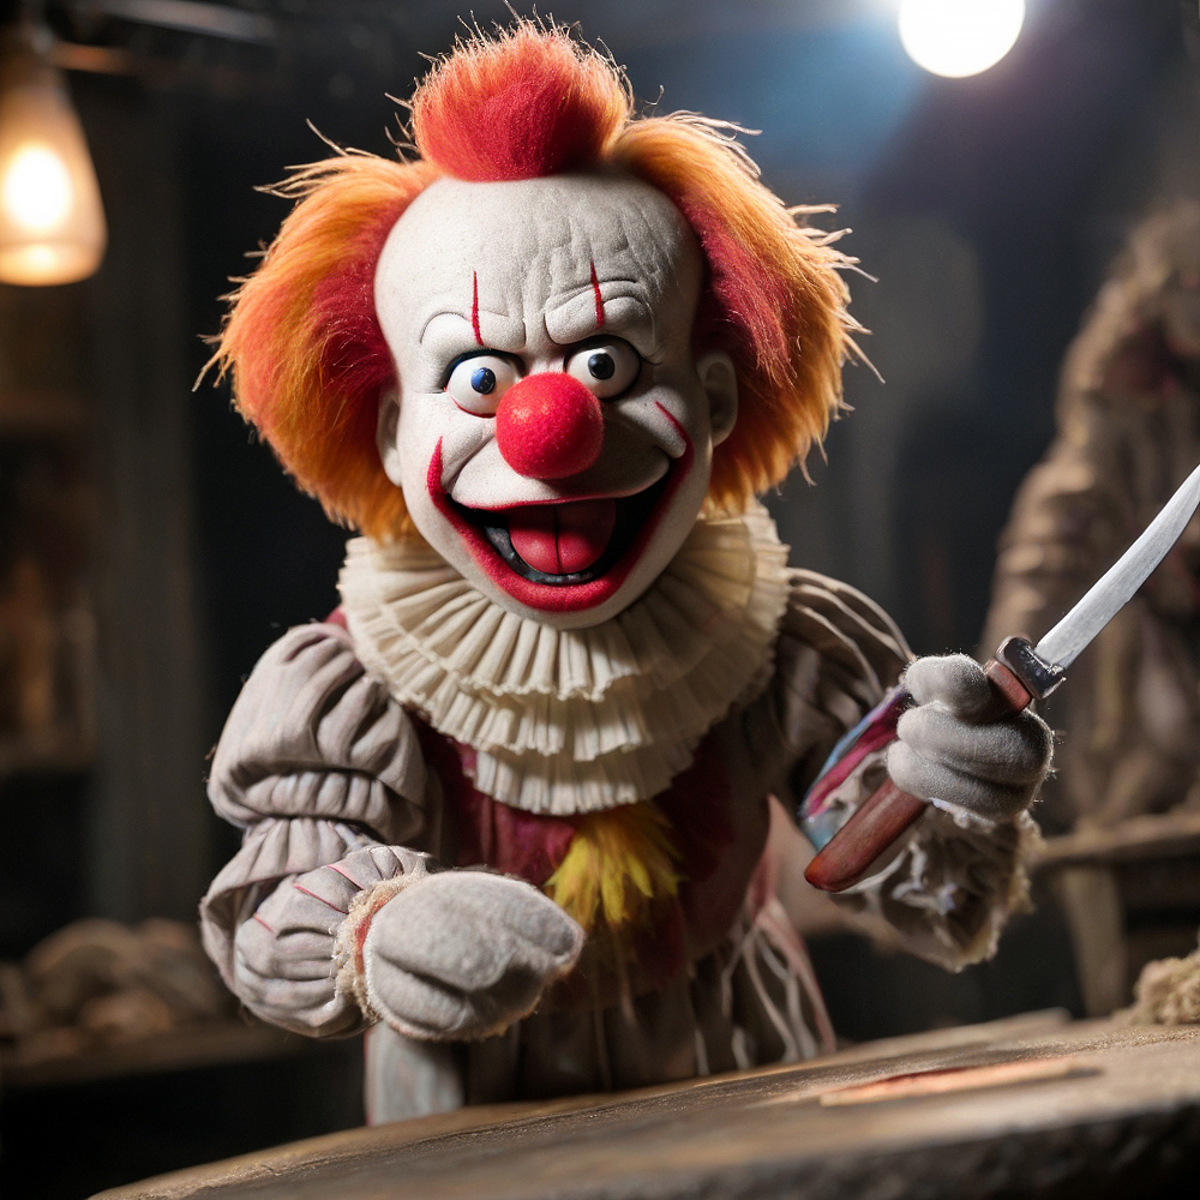 A Clown with a Knife in a Scary Setting